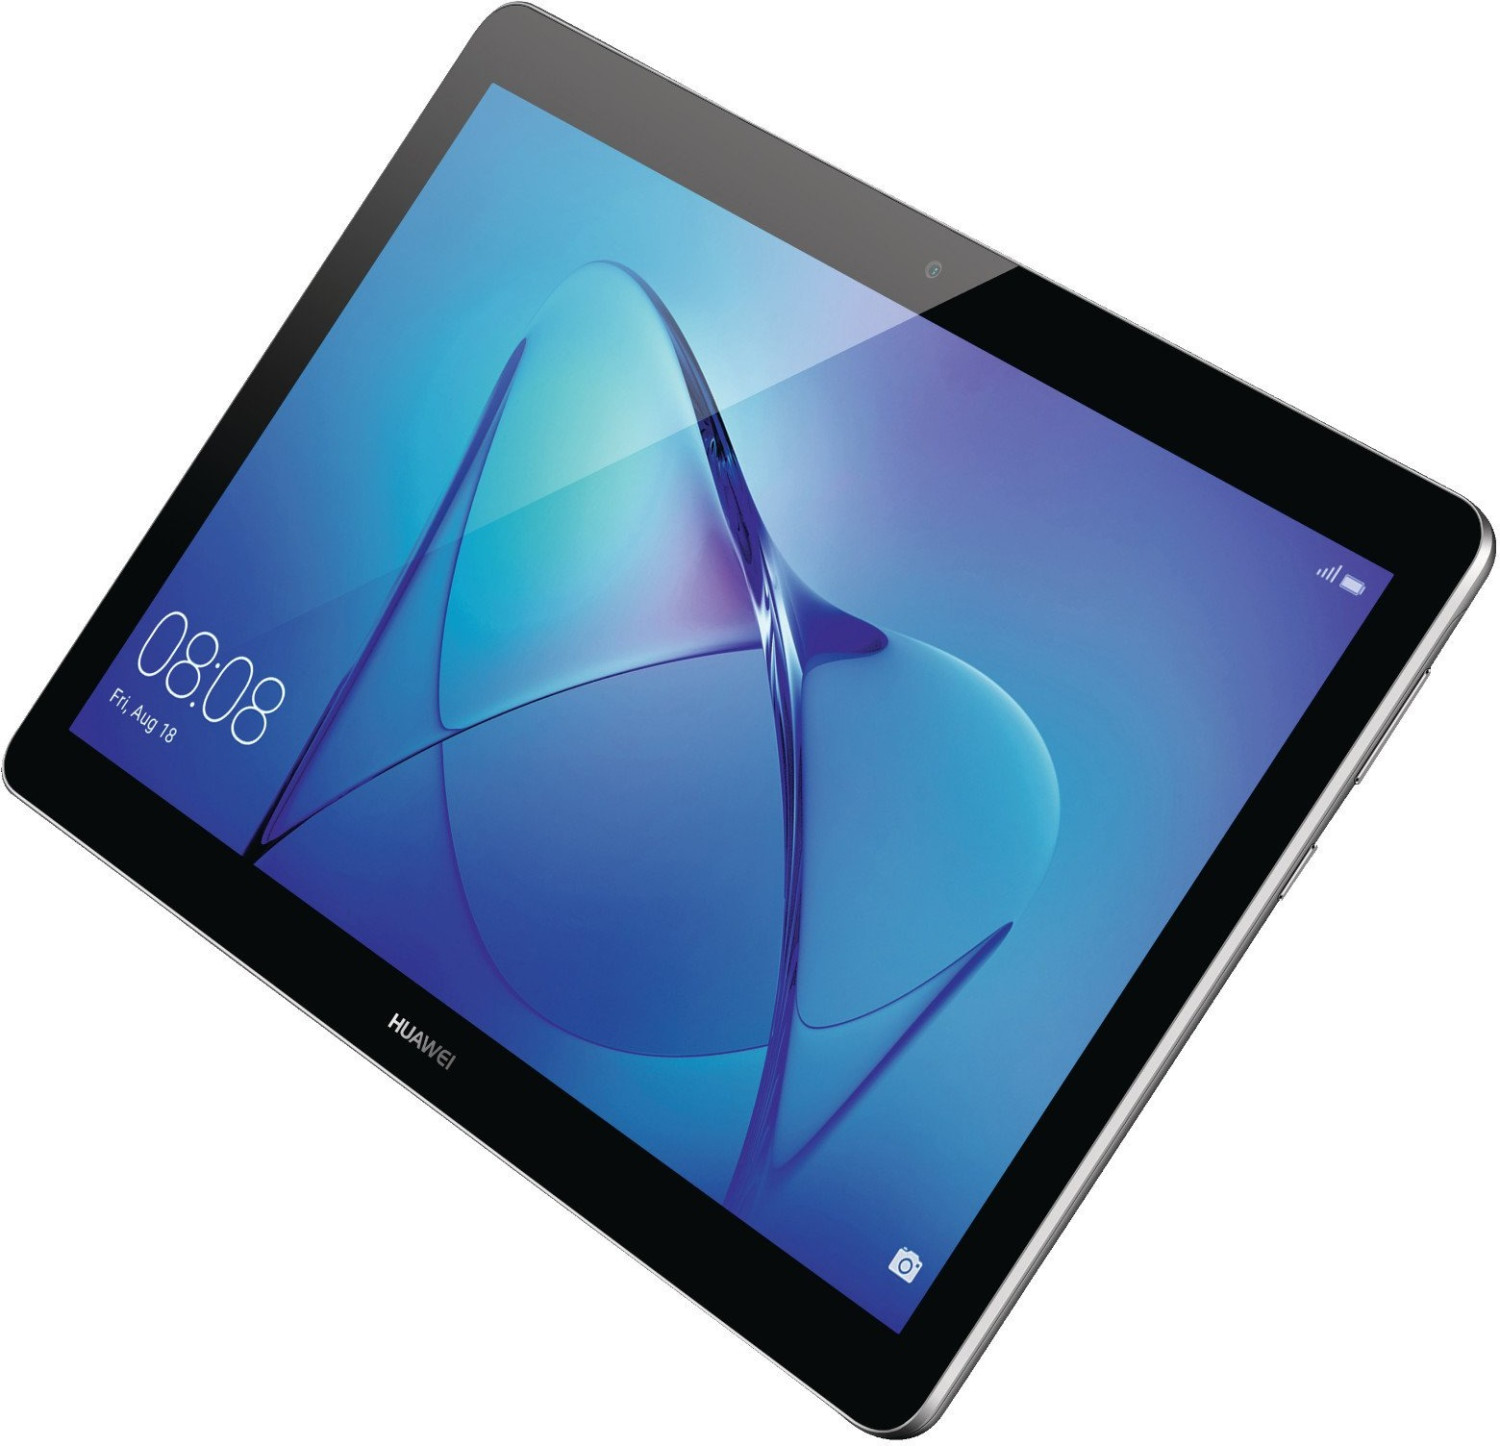 Buy Huawei MediaPad T3 10 4G from £132.00 (Today) – Best Deals on ...